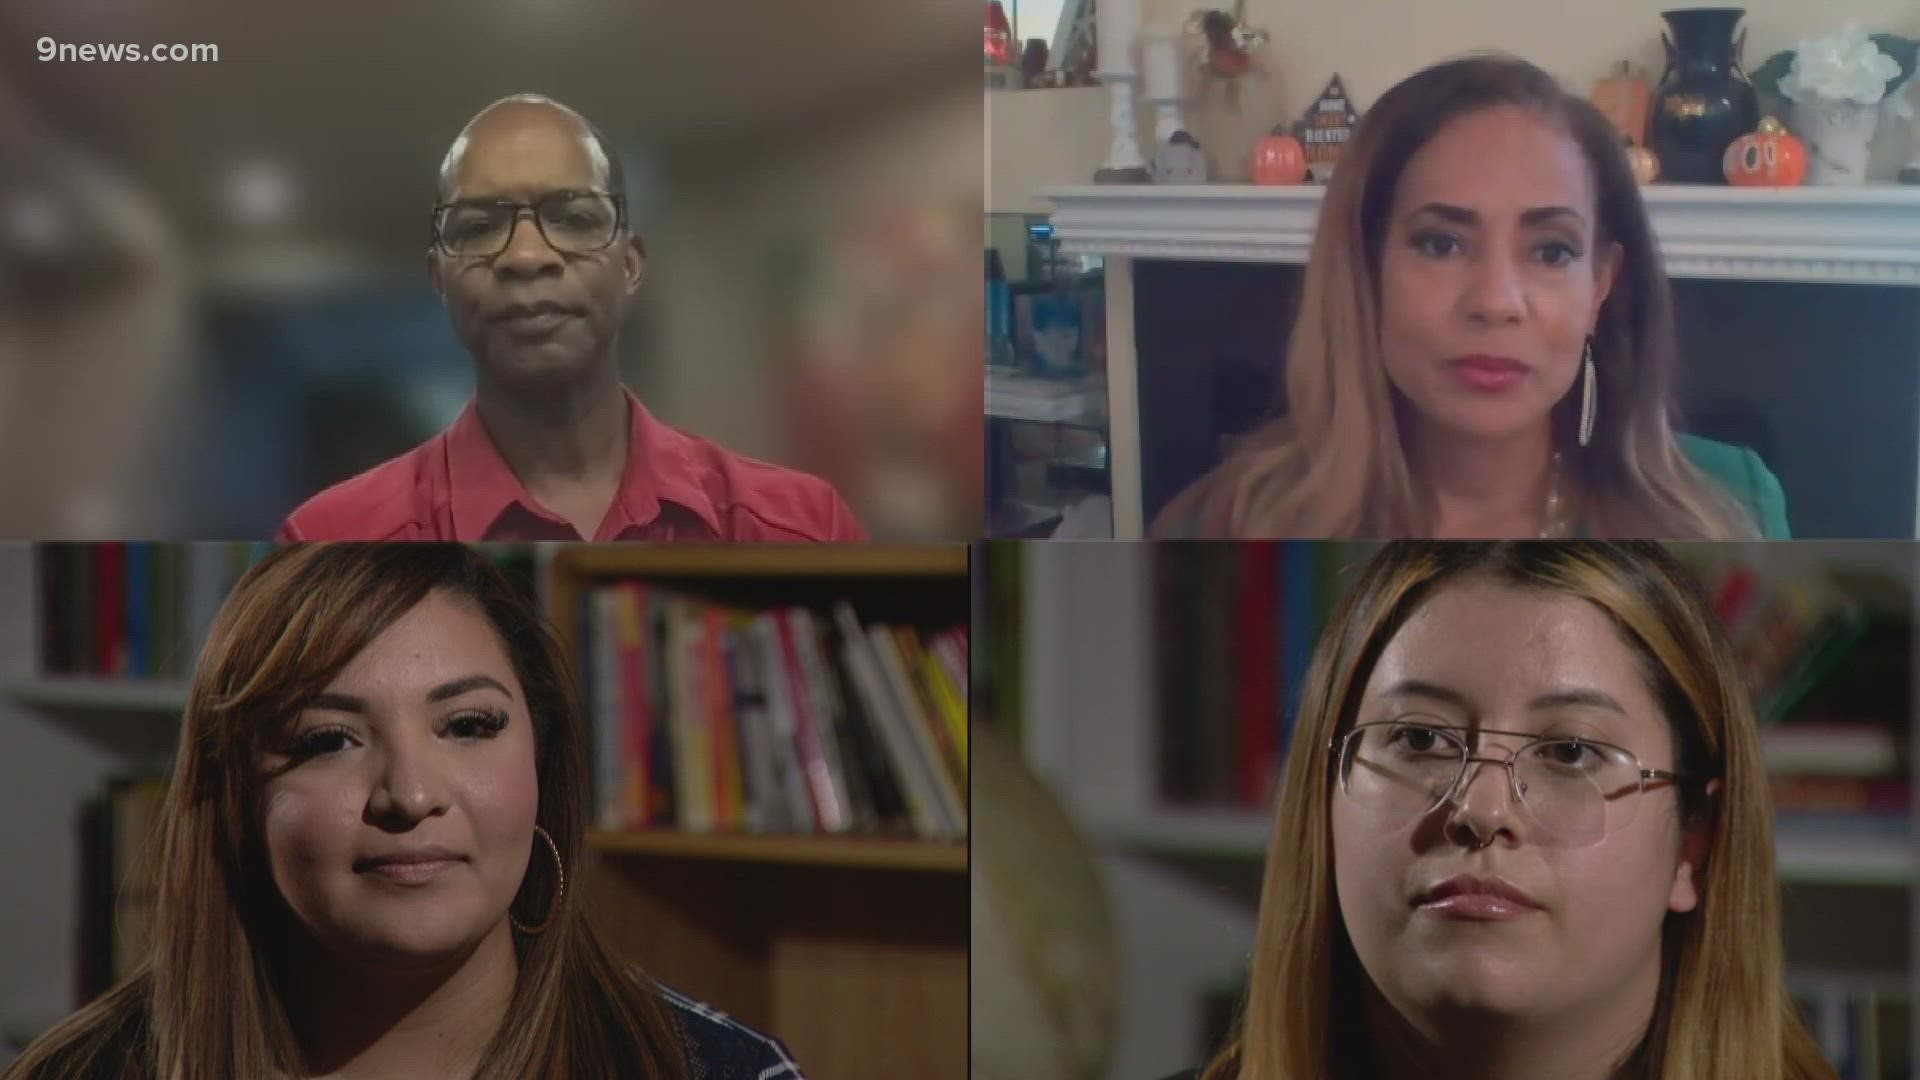 We spoke to four Coloradans about their experiences with being told they're "acting white," even from other people of color.